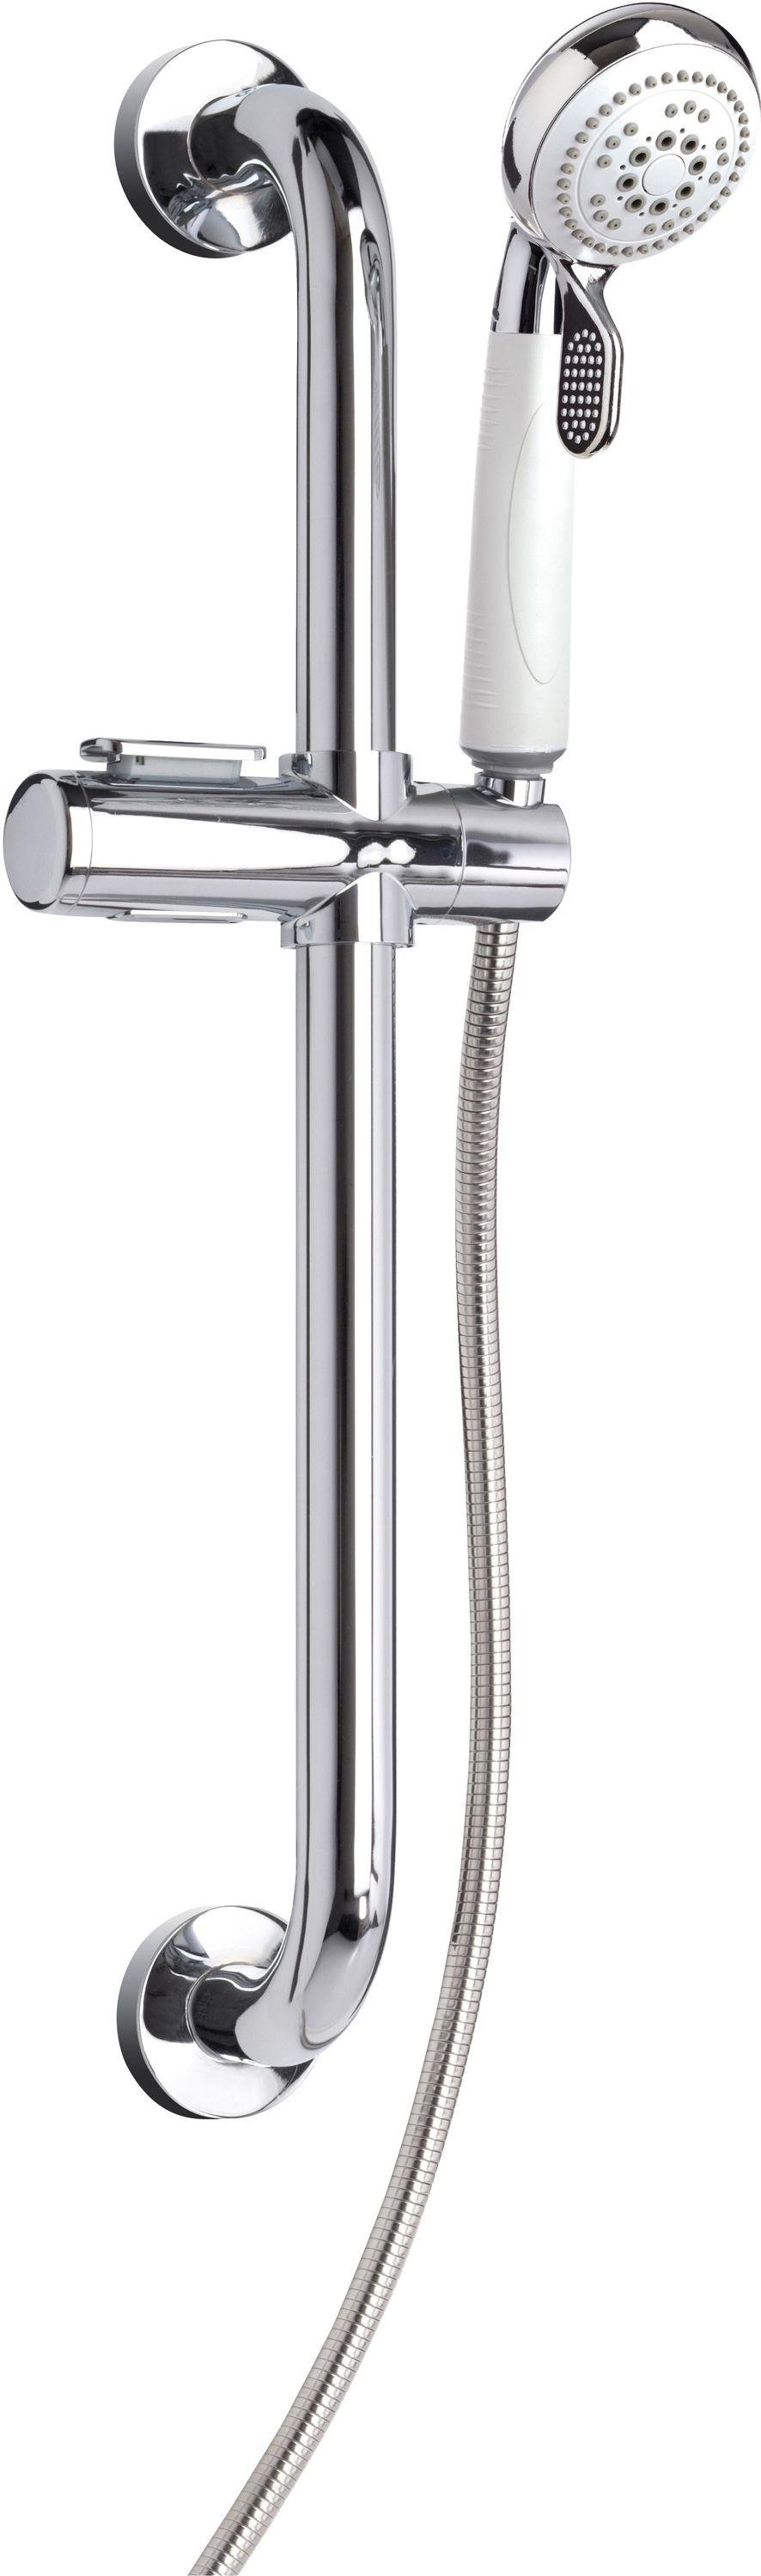 Croydex Assistive 3 Function Shower Kit - White and Chrome